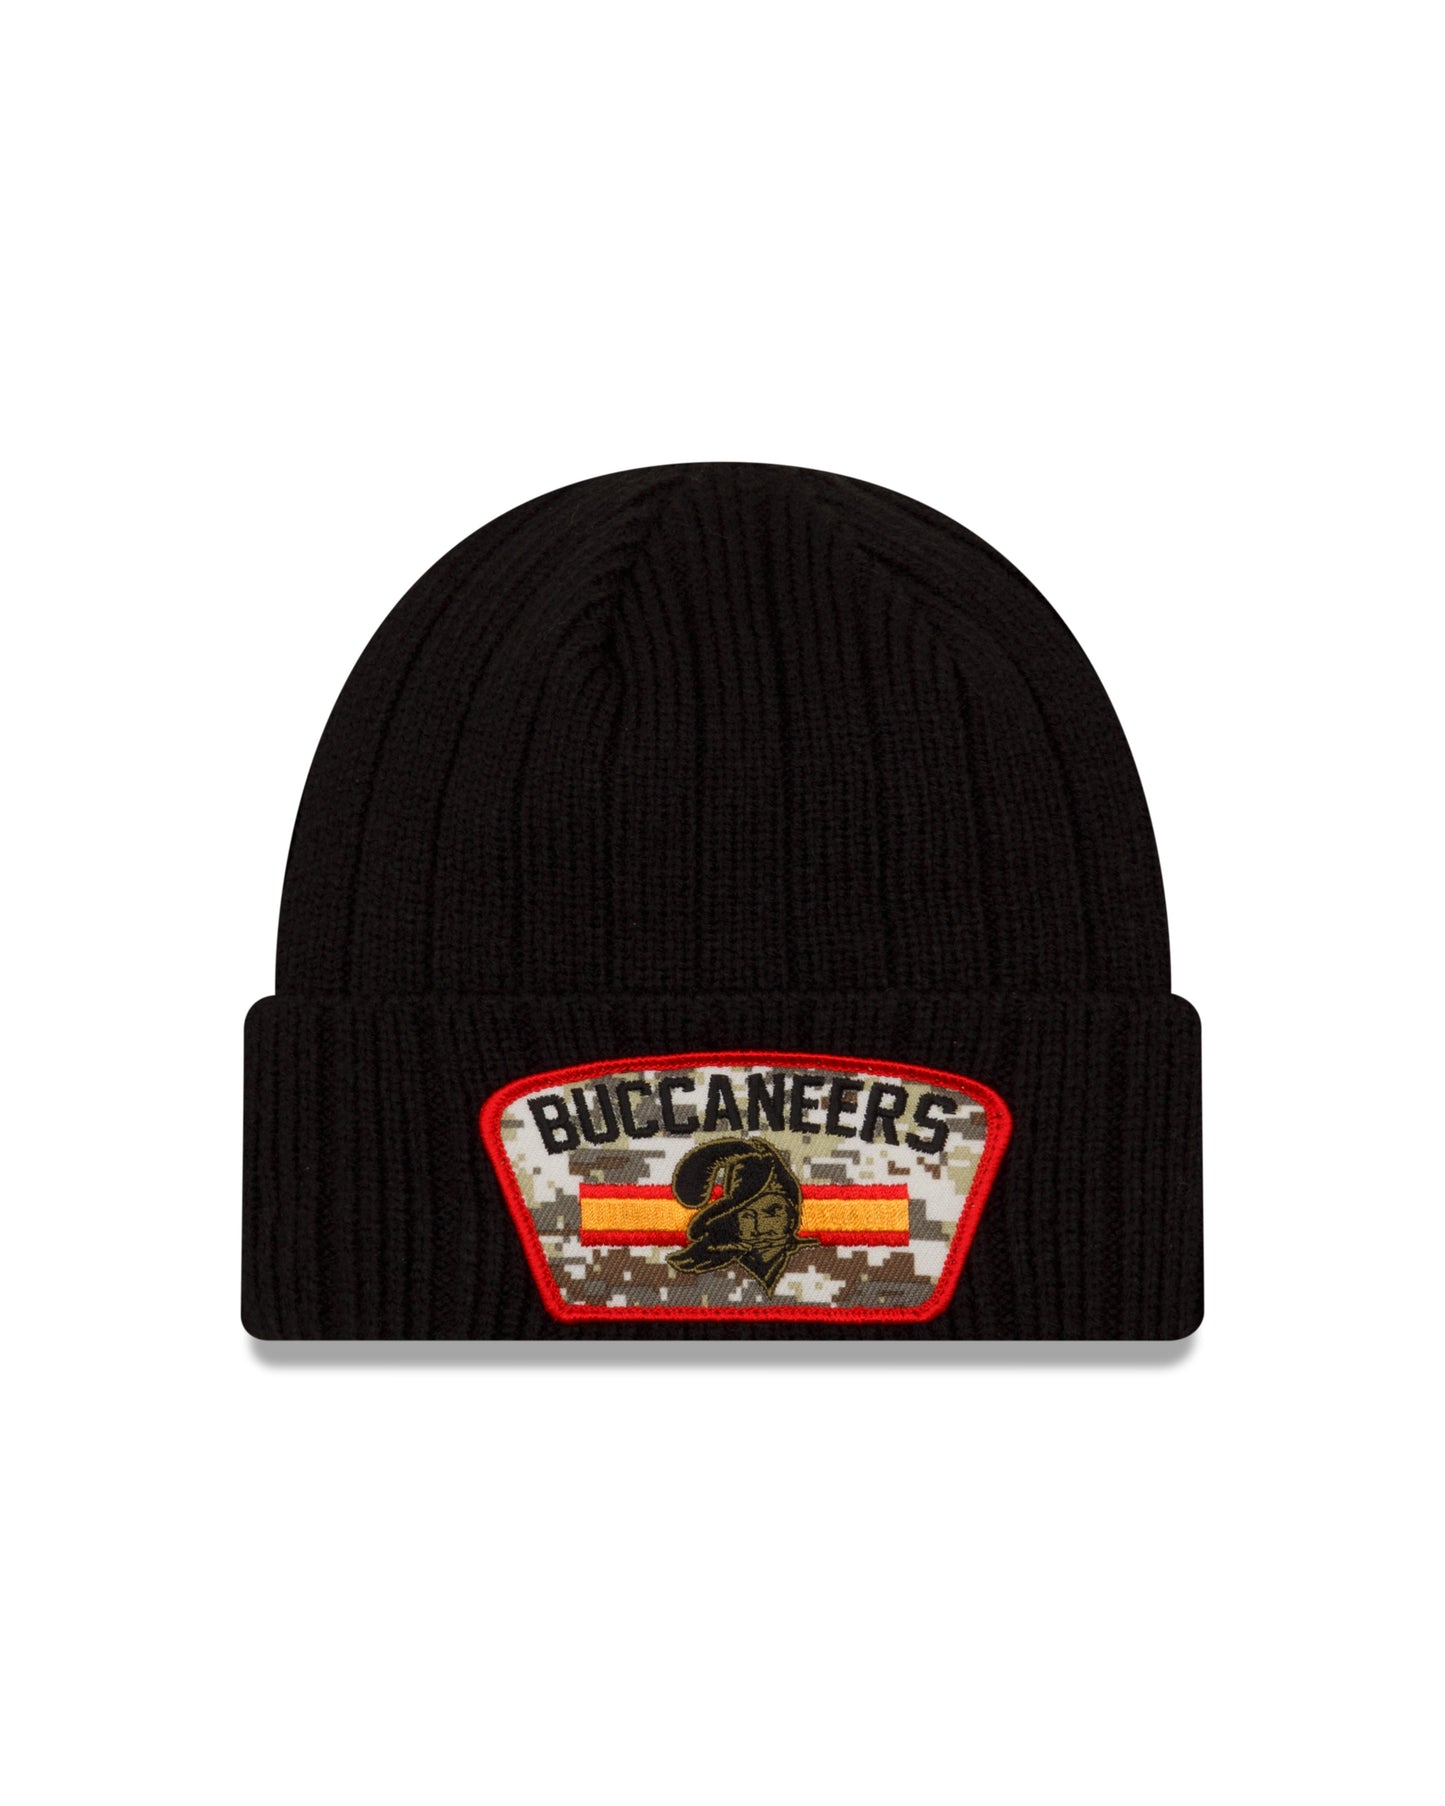 Tampa Bay Buccaneers New Era Salute to Service Sideline Knit Hat- Black